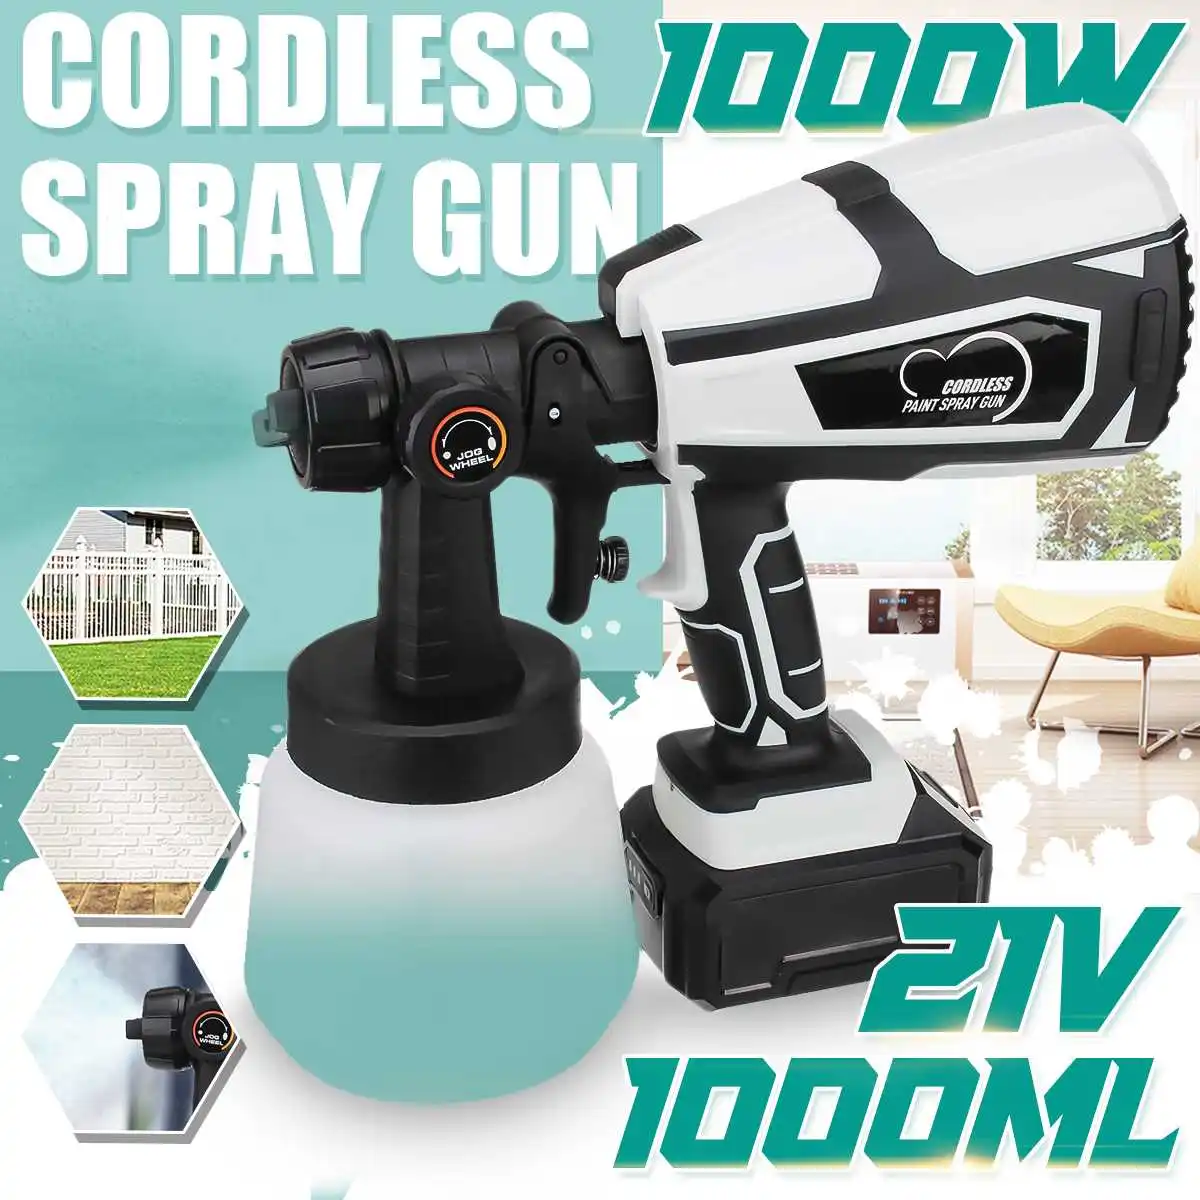 

21V 1000ML Electric Cordless Spray Gun High Power Home Electric Paint Sprayer With 3 Nozzle Easy Spraying Perfect for Beginner